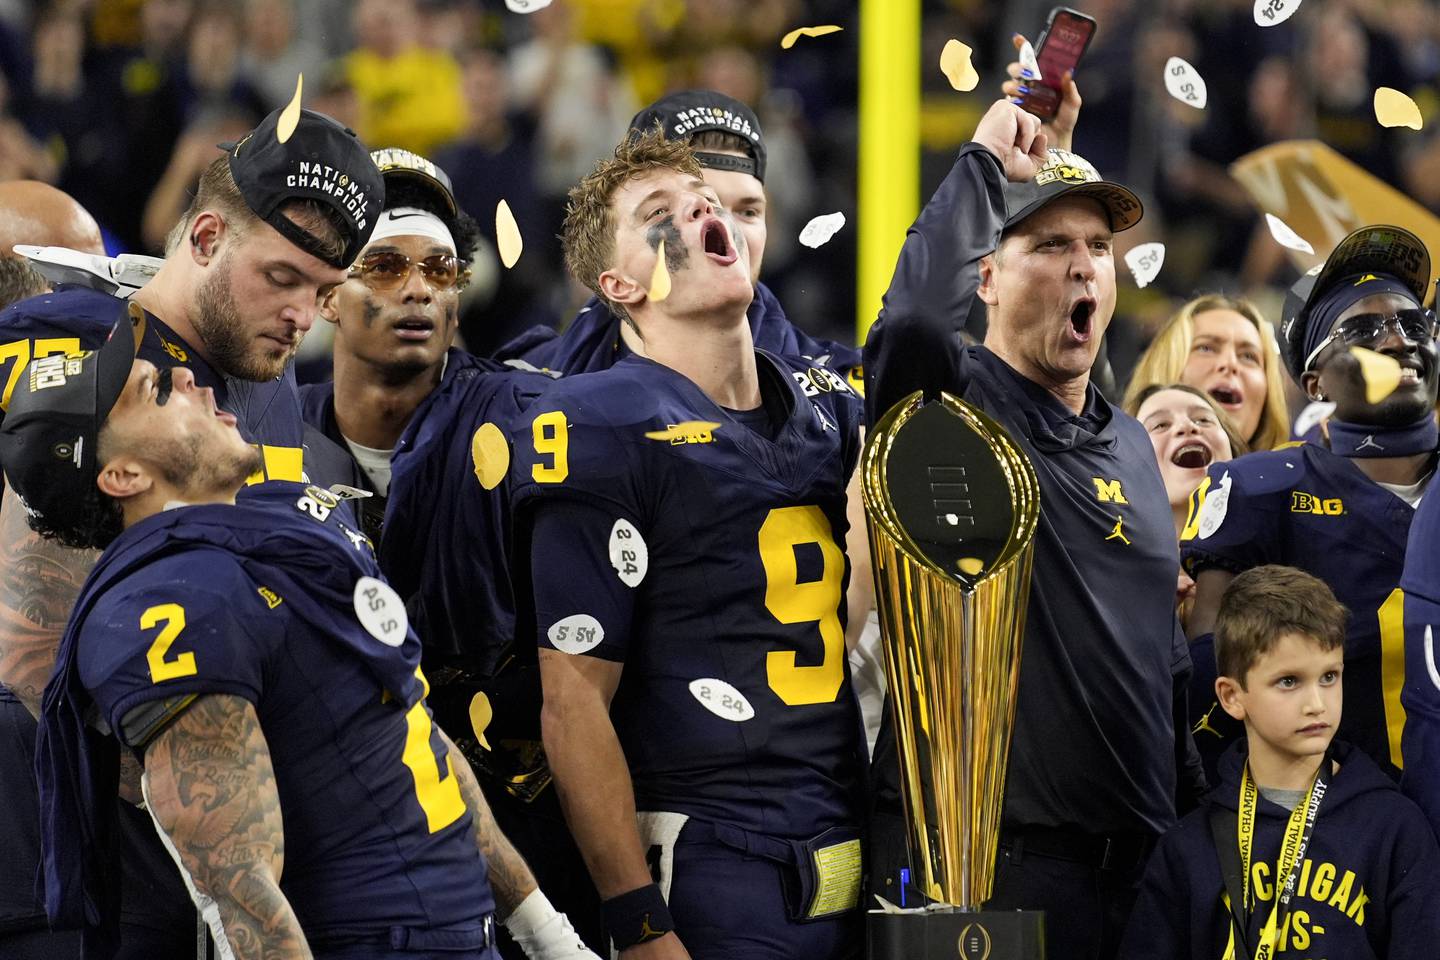 Michigan head coach Jim Harbaugh and quarterback J.J. McCarthy celebrate with the trophy after their win against Washington in the national championship game in January in Houston.